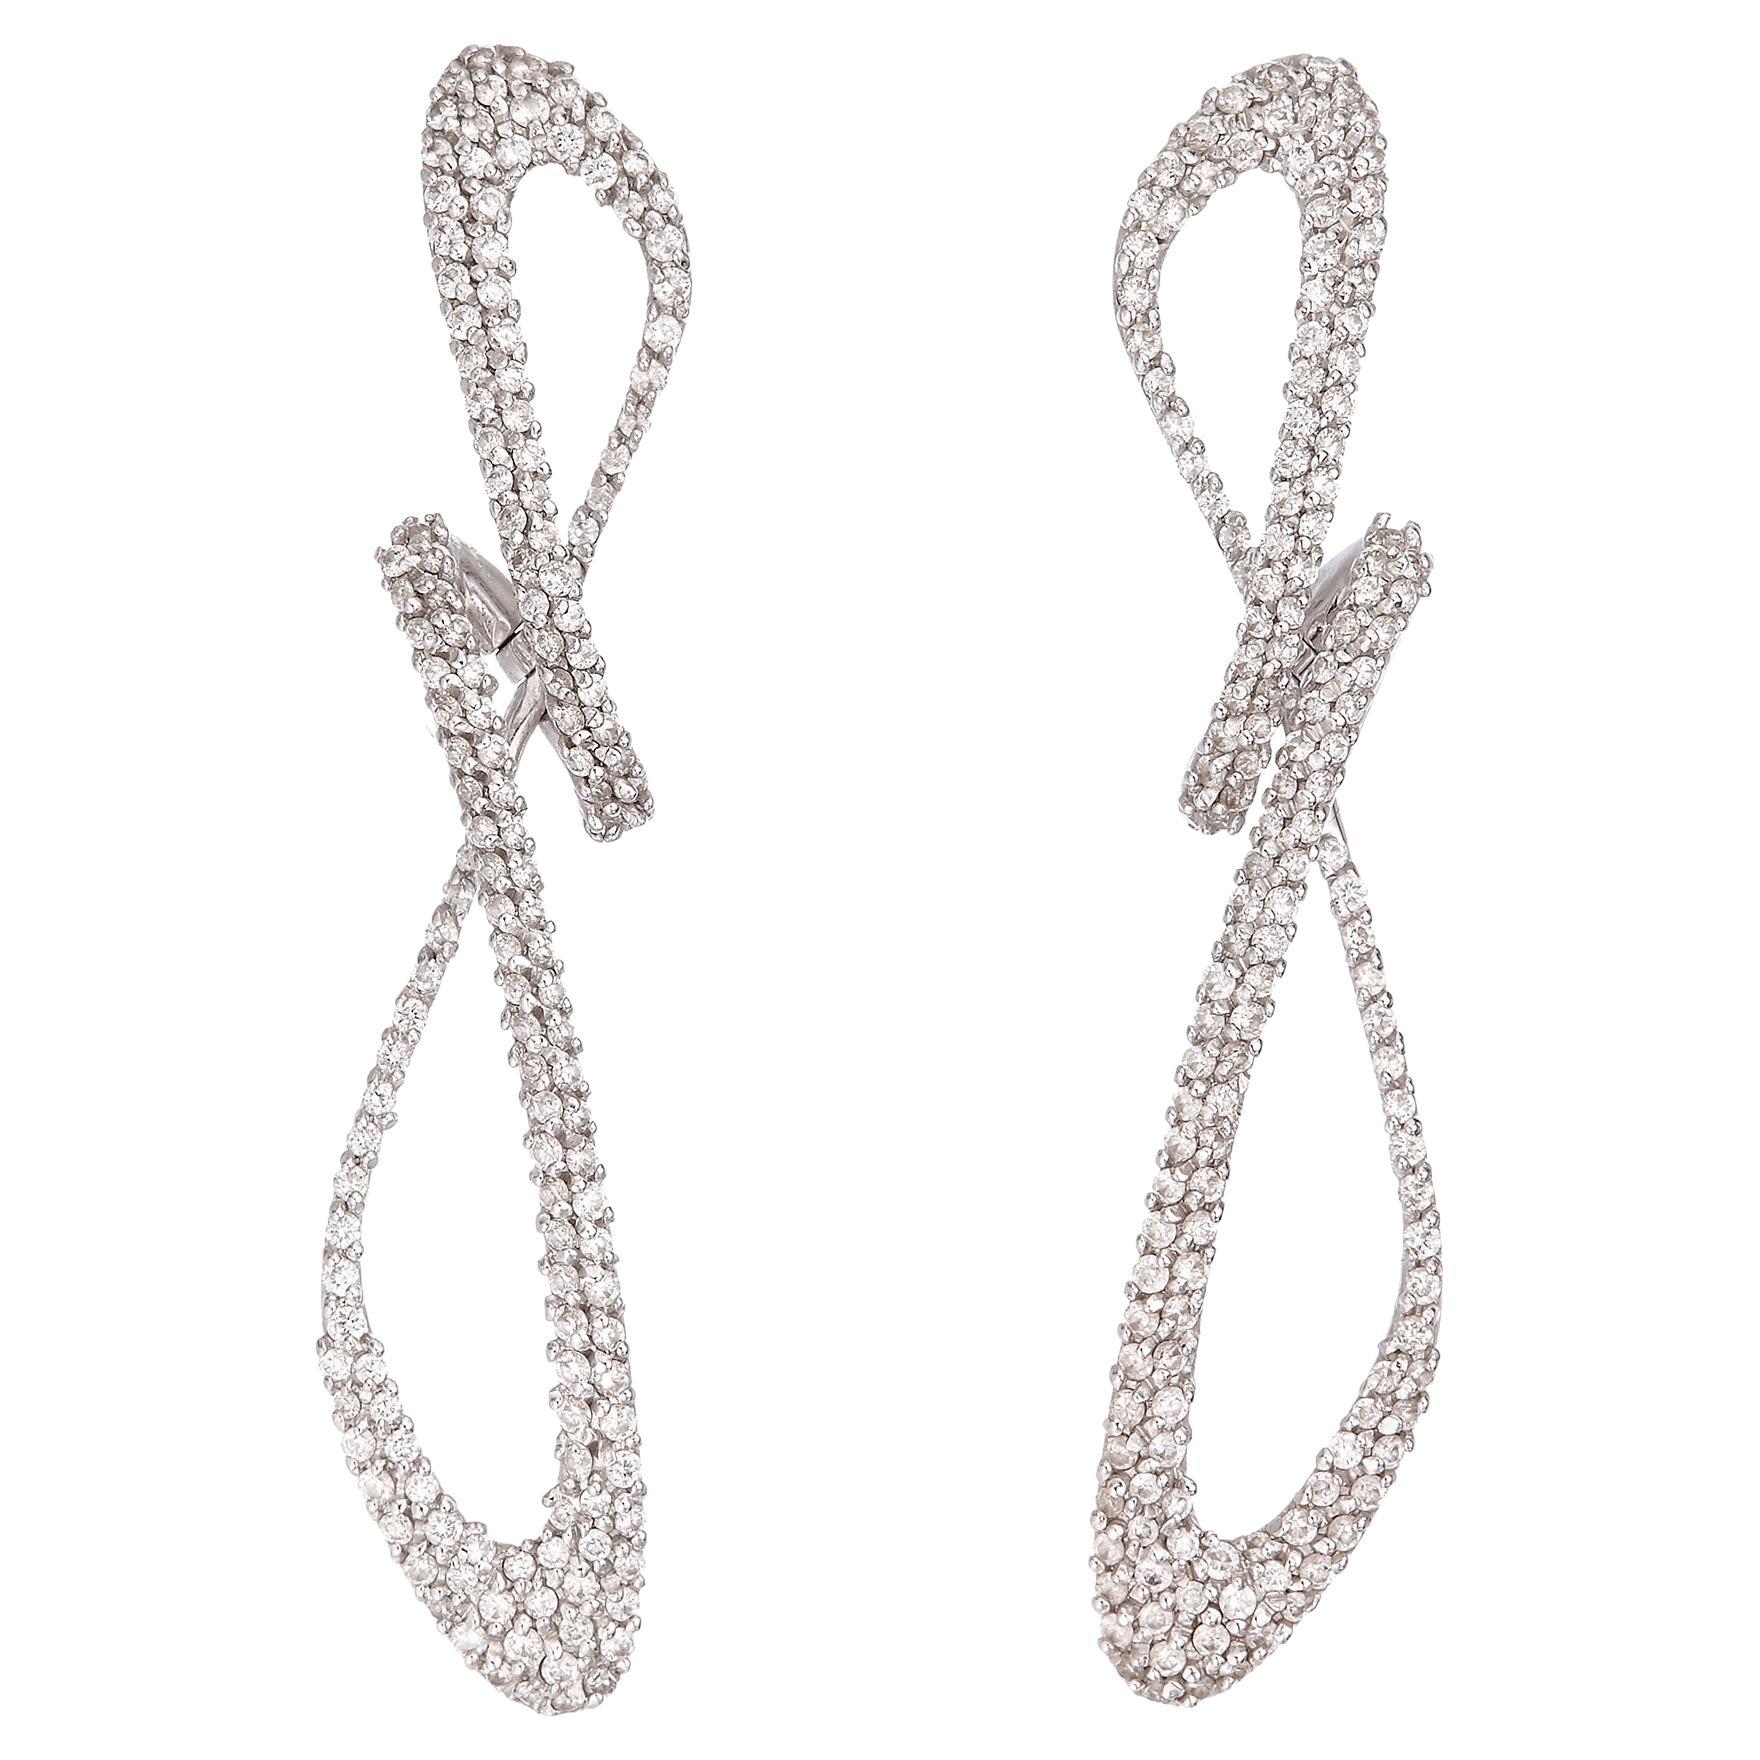 18k White Gold Diamond Pave Delicate Cosmic Empowering Shape-shifting Earrings